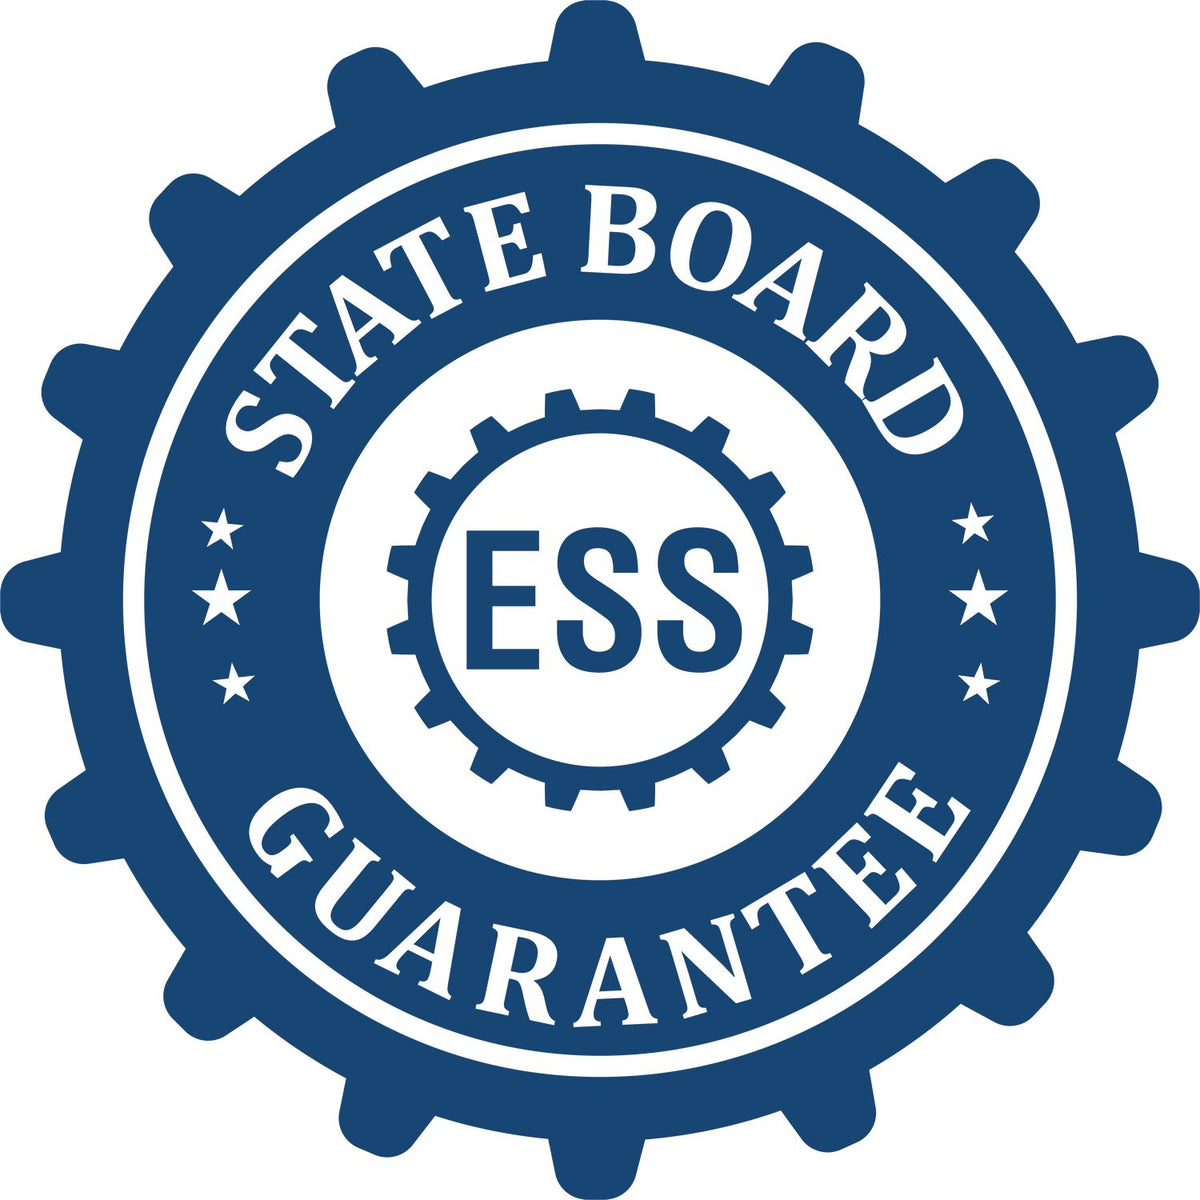 An emblem in a gear shape illustrating a state board guarantee for the Super Slim Puerto Rico Notary Public Stamp product.